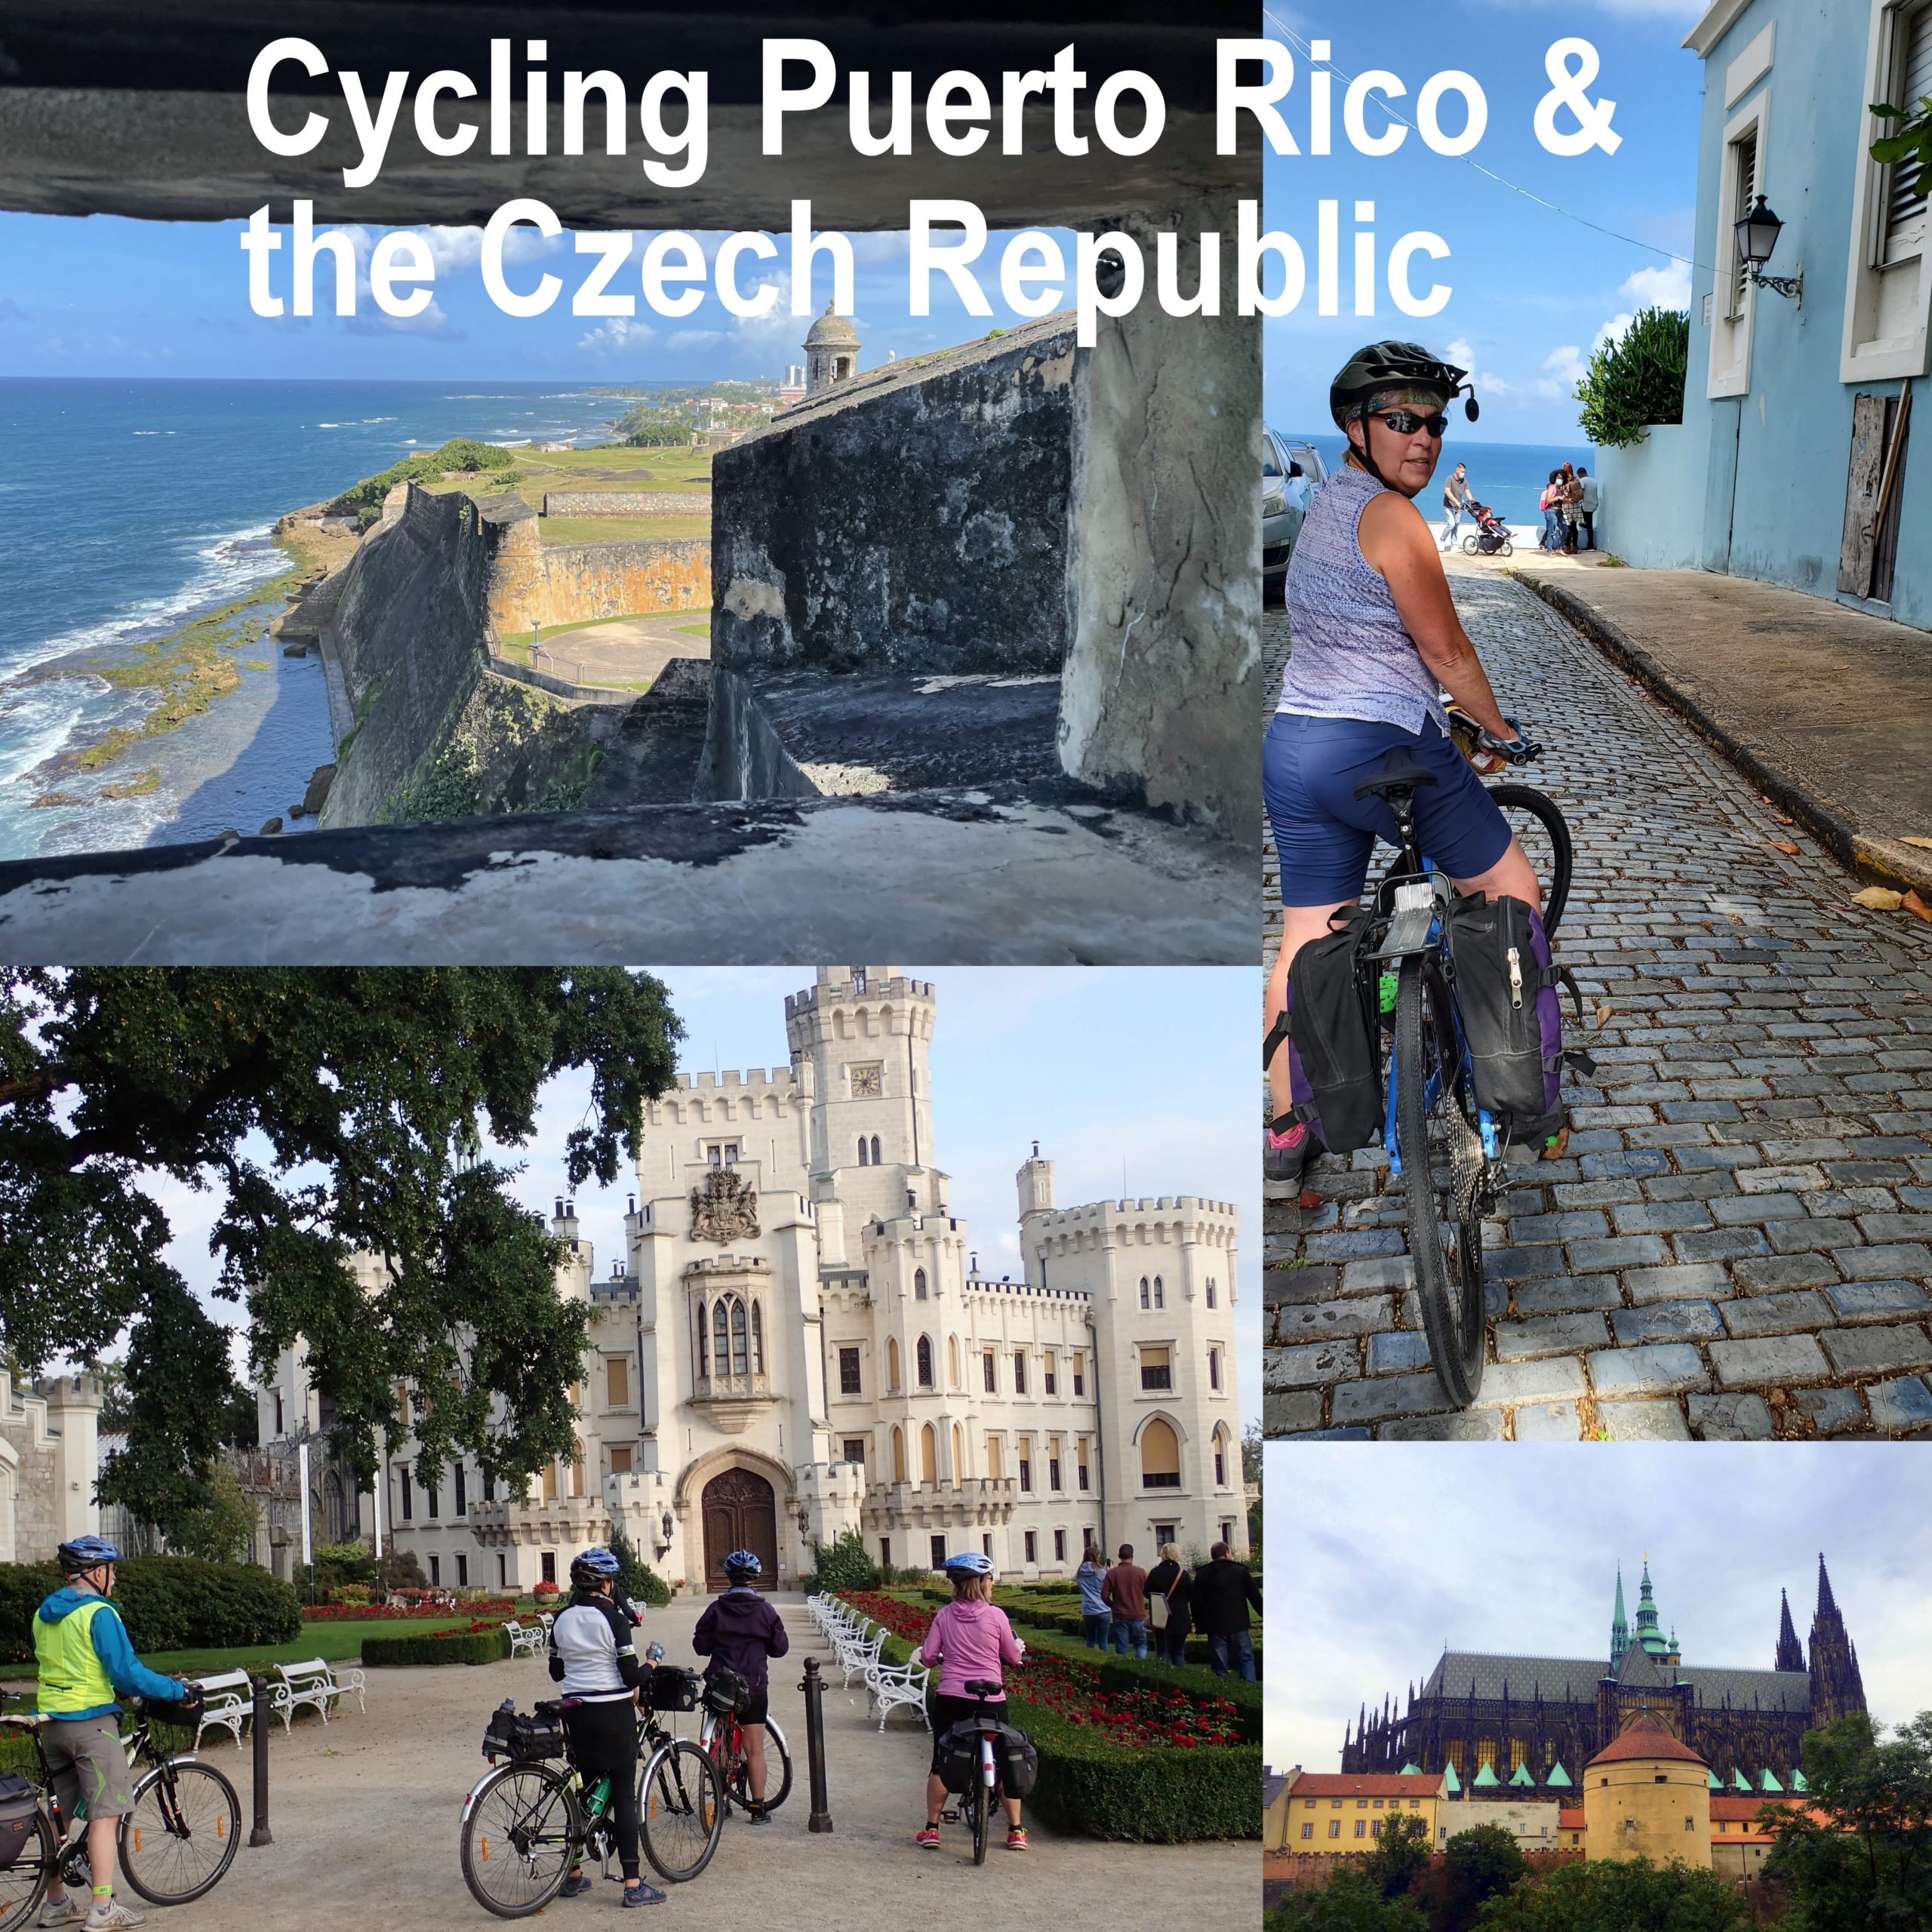 Cycling Puerto Rico and the Czech Republic presentation at Free Cycles in Missoula on February 23, 2023